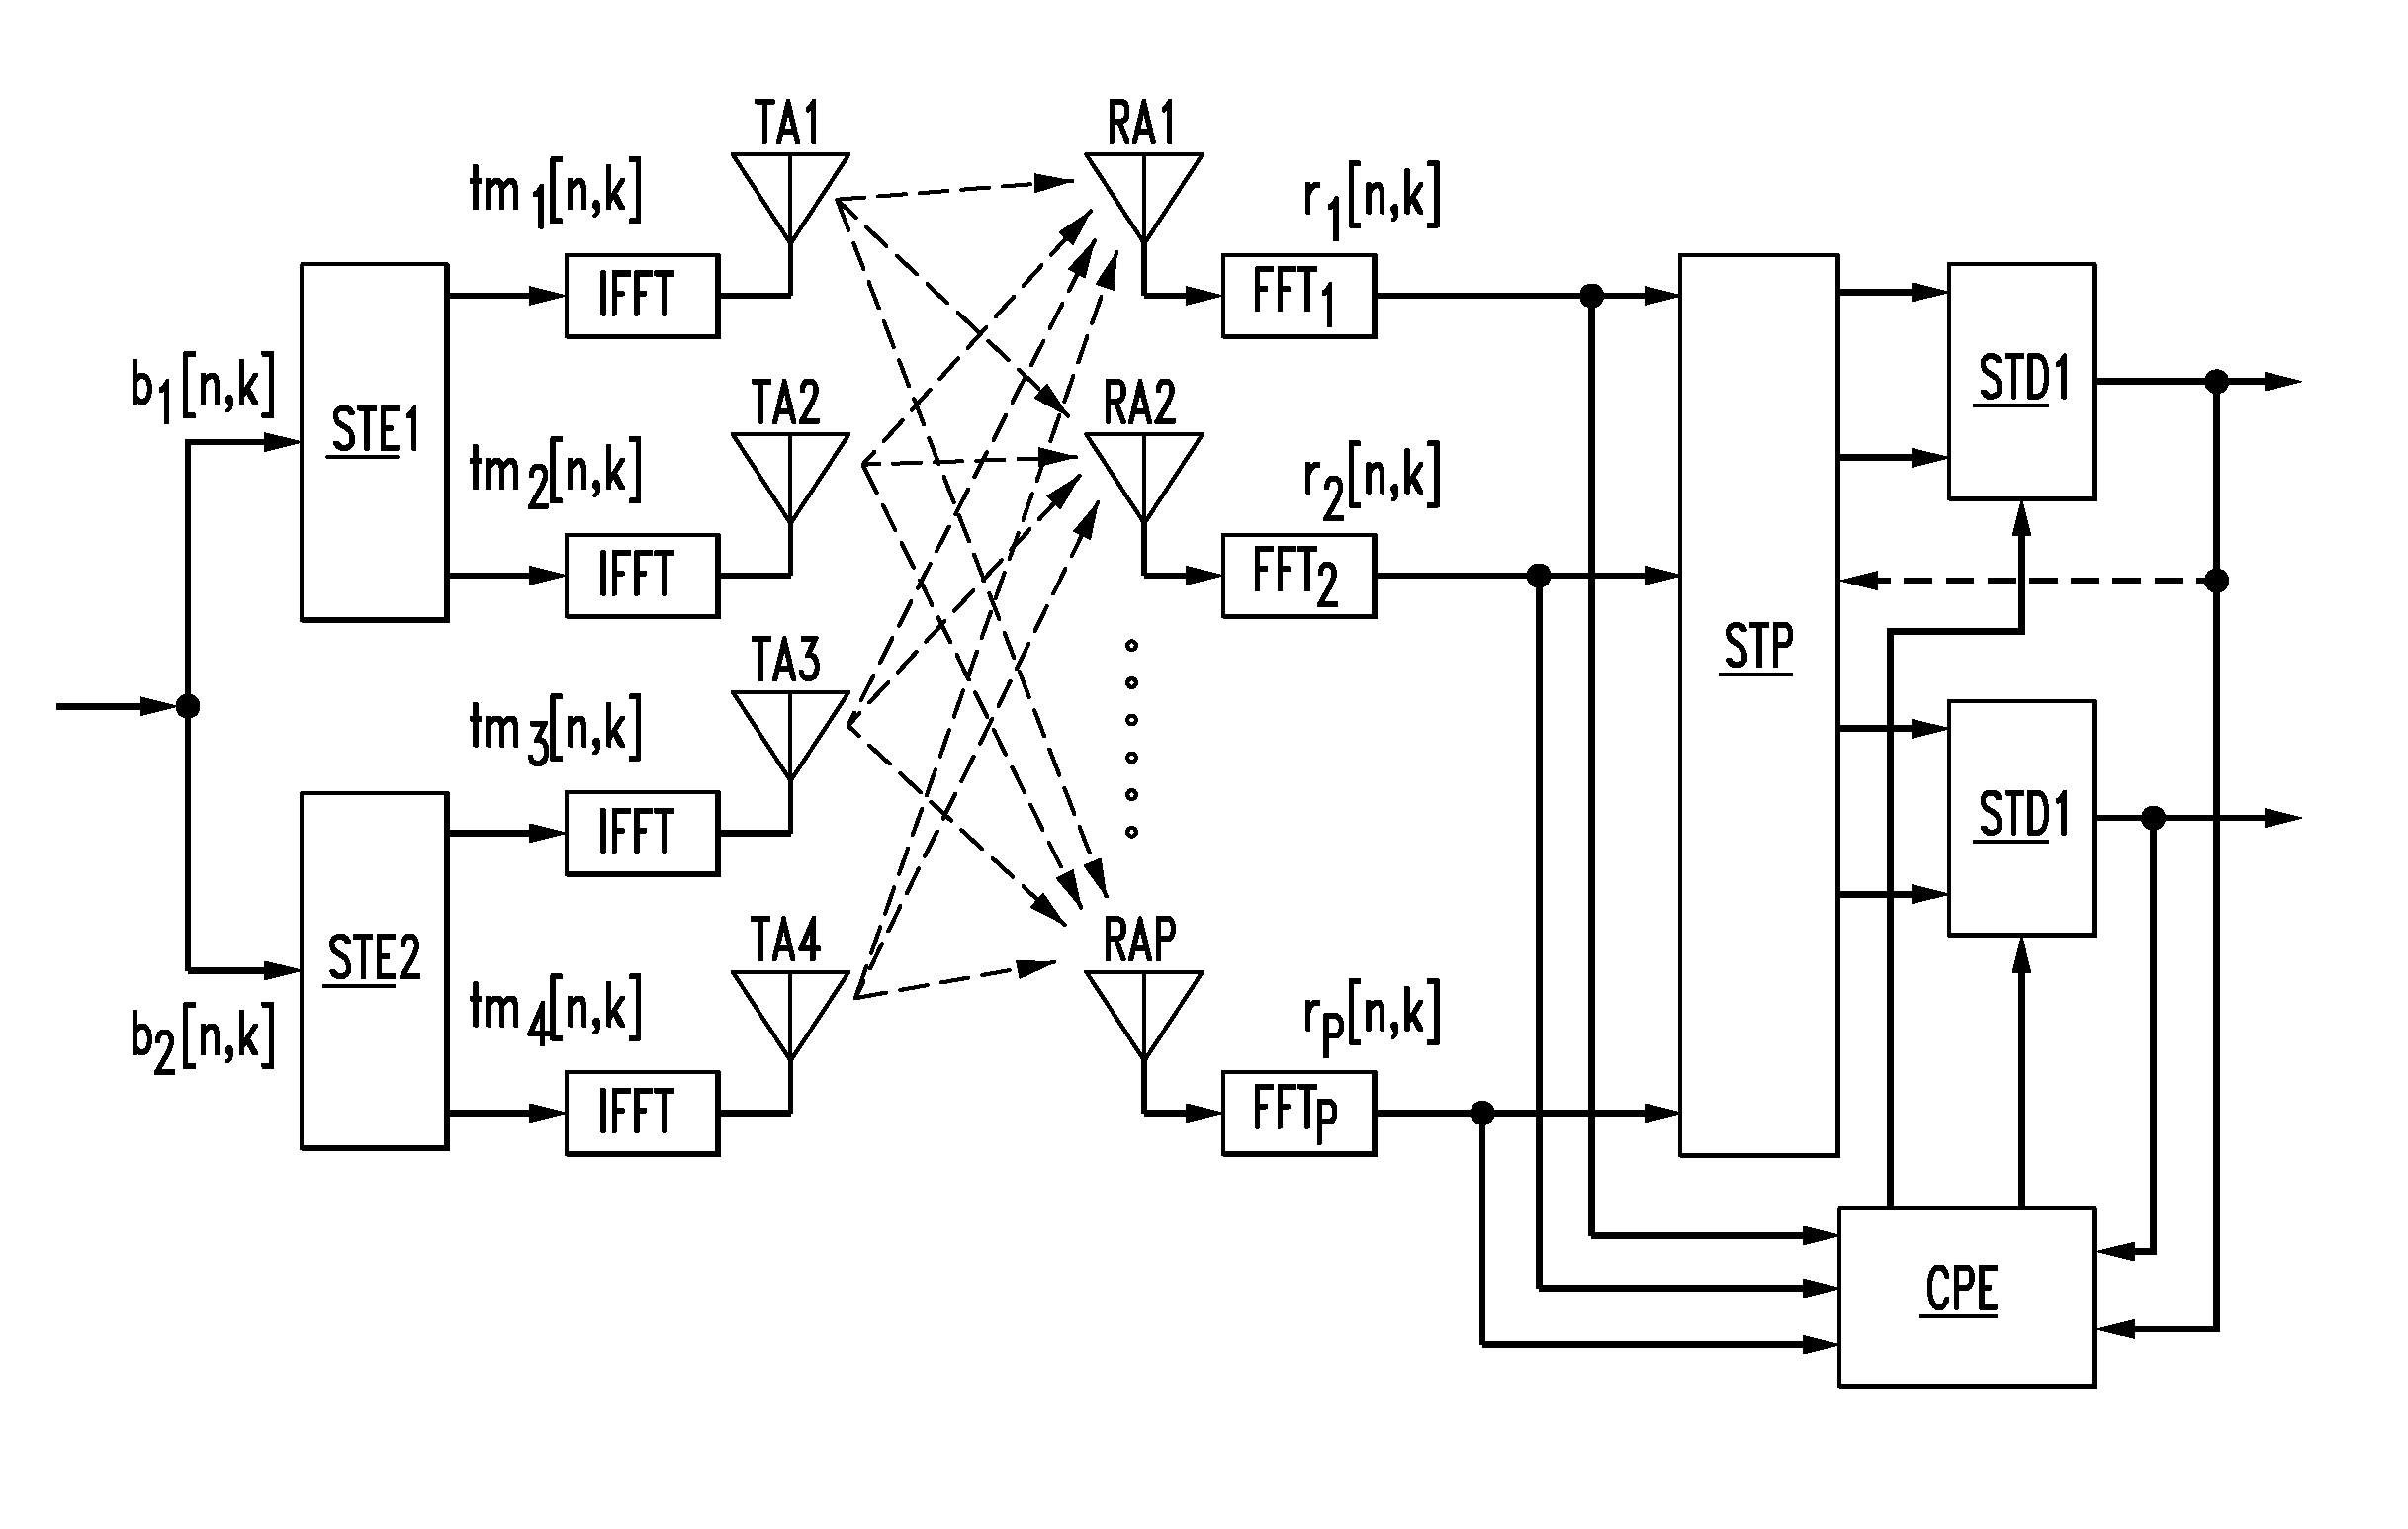 MIMO OFDM system